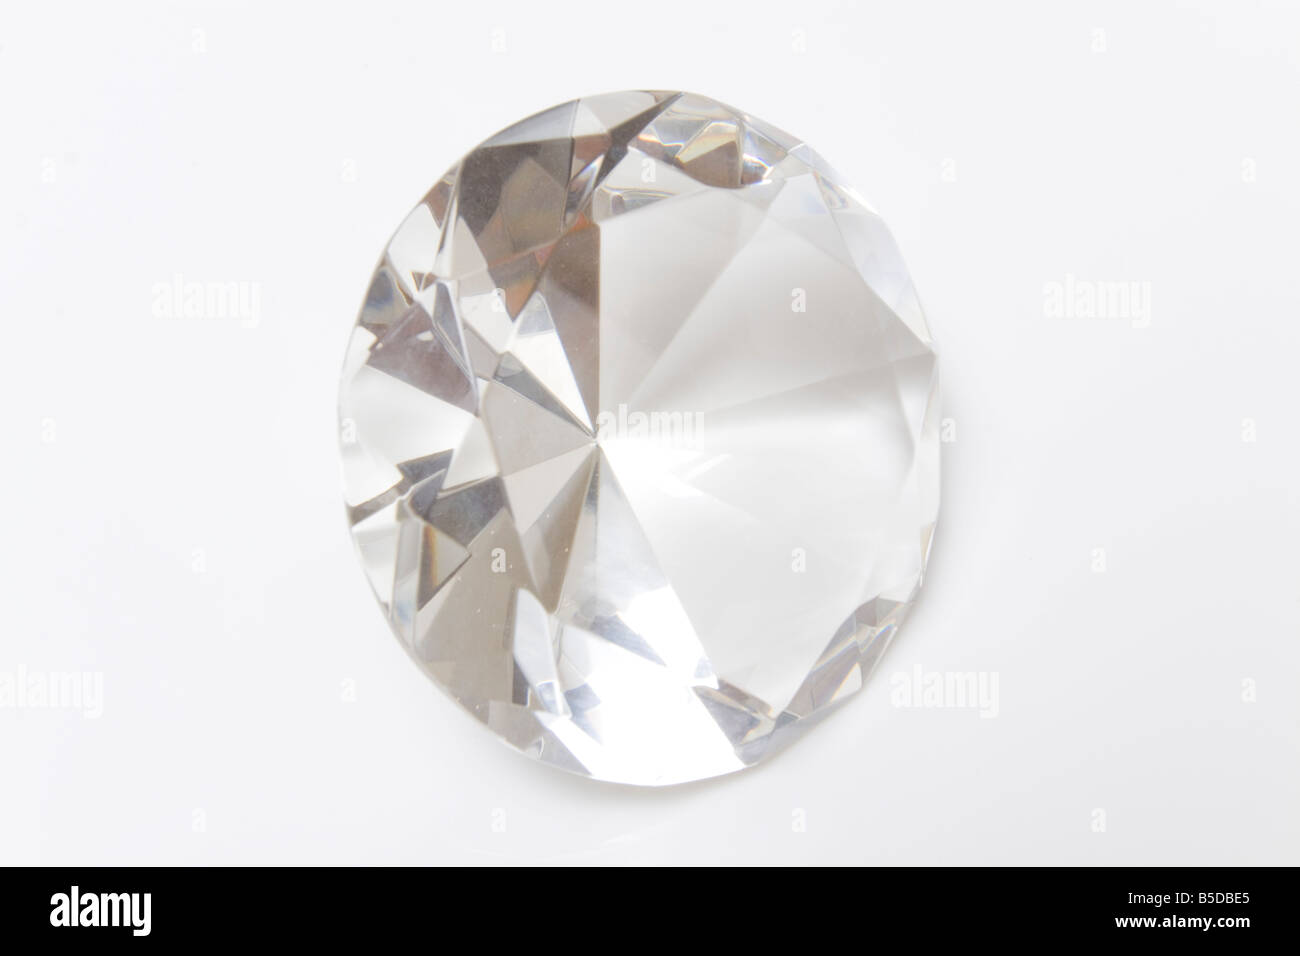 Diamond isolated on a white background studio Banque D'Images